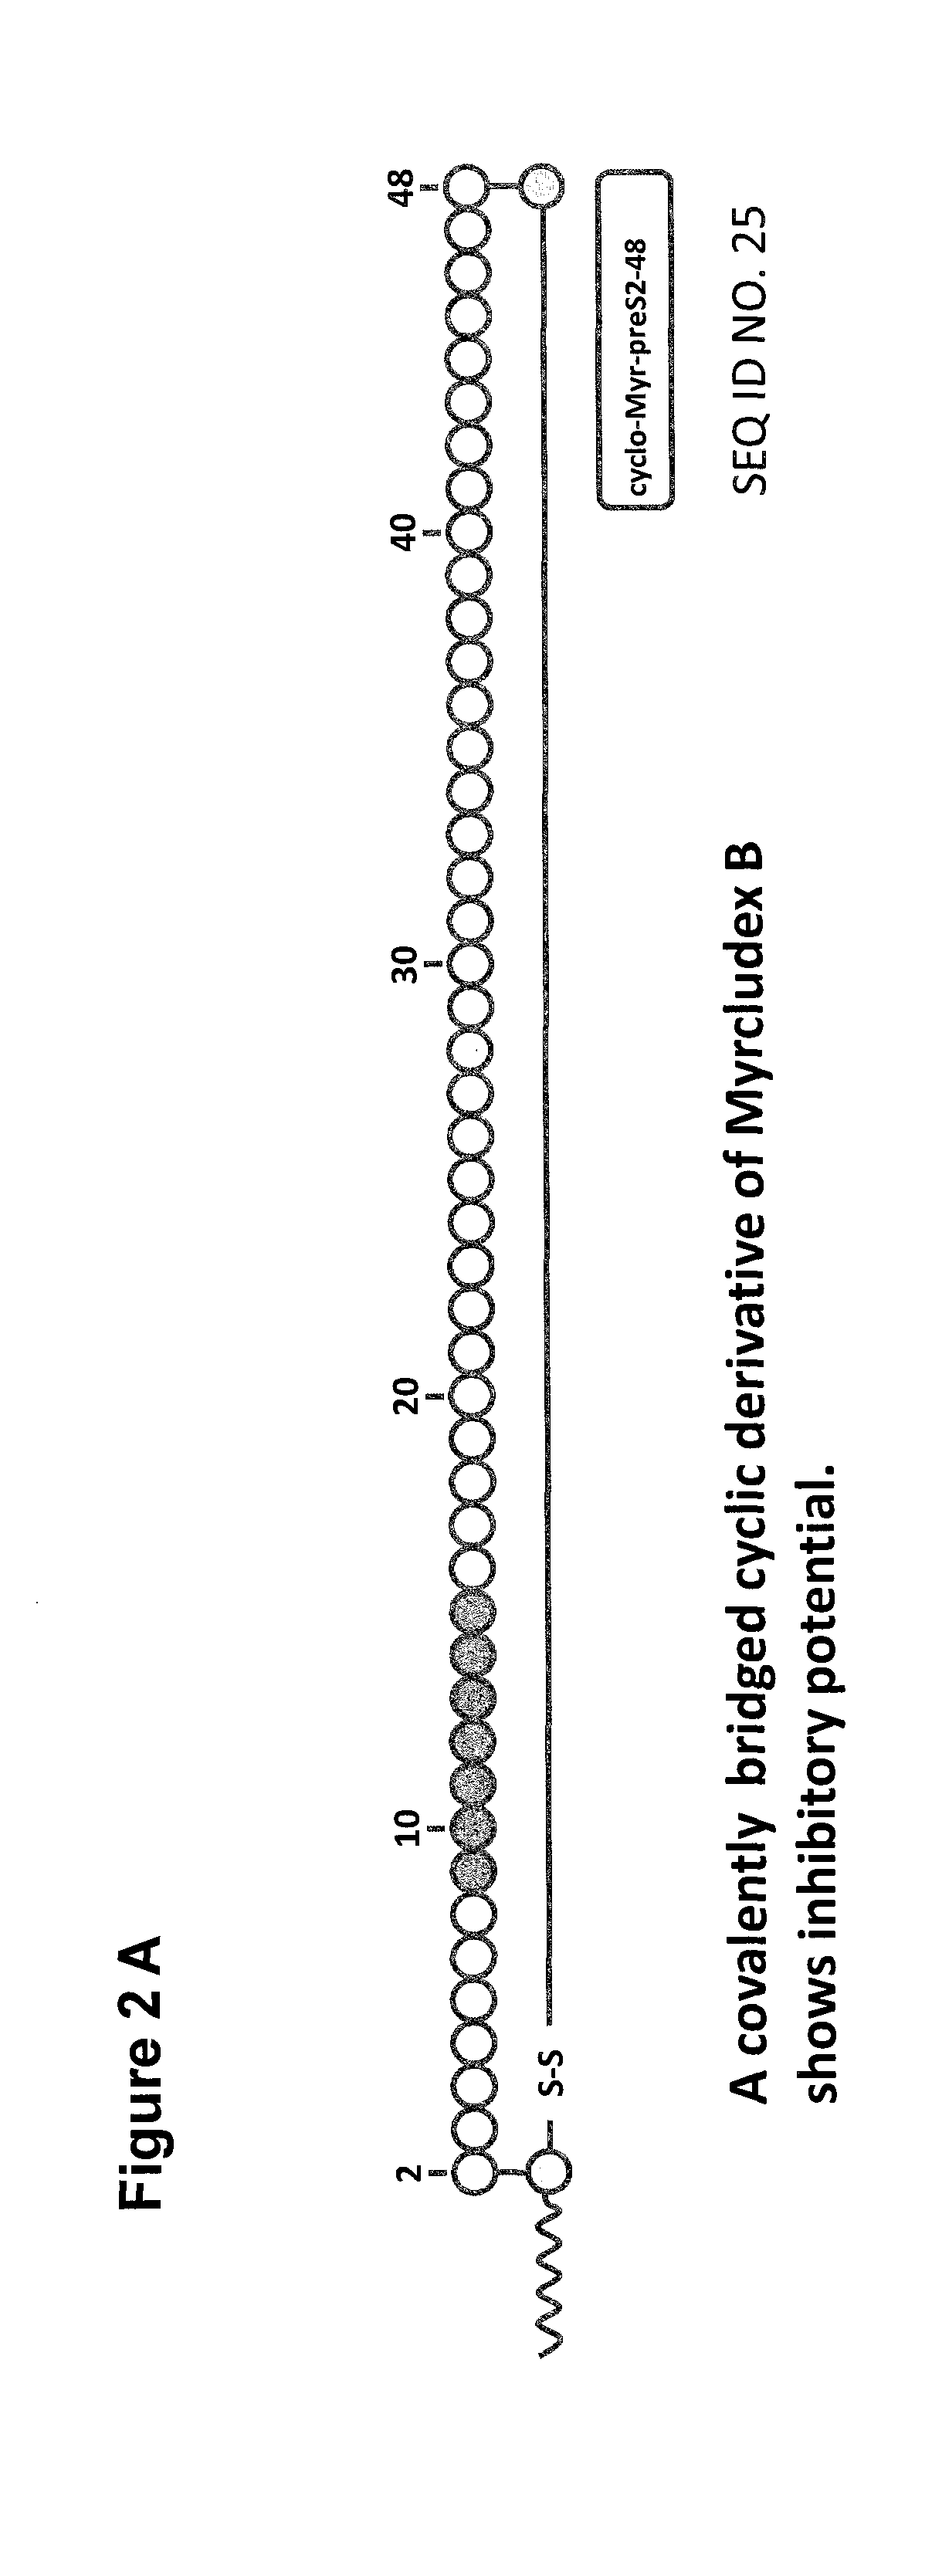 Cyclic ntcp-targeting peptides and their uses as entry inhibitors